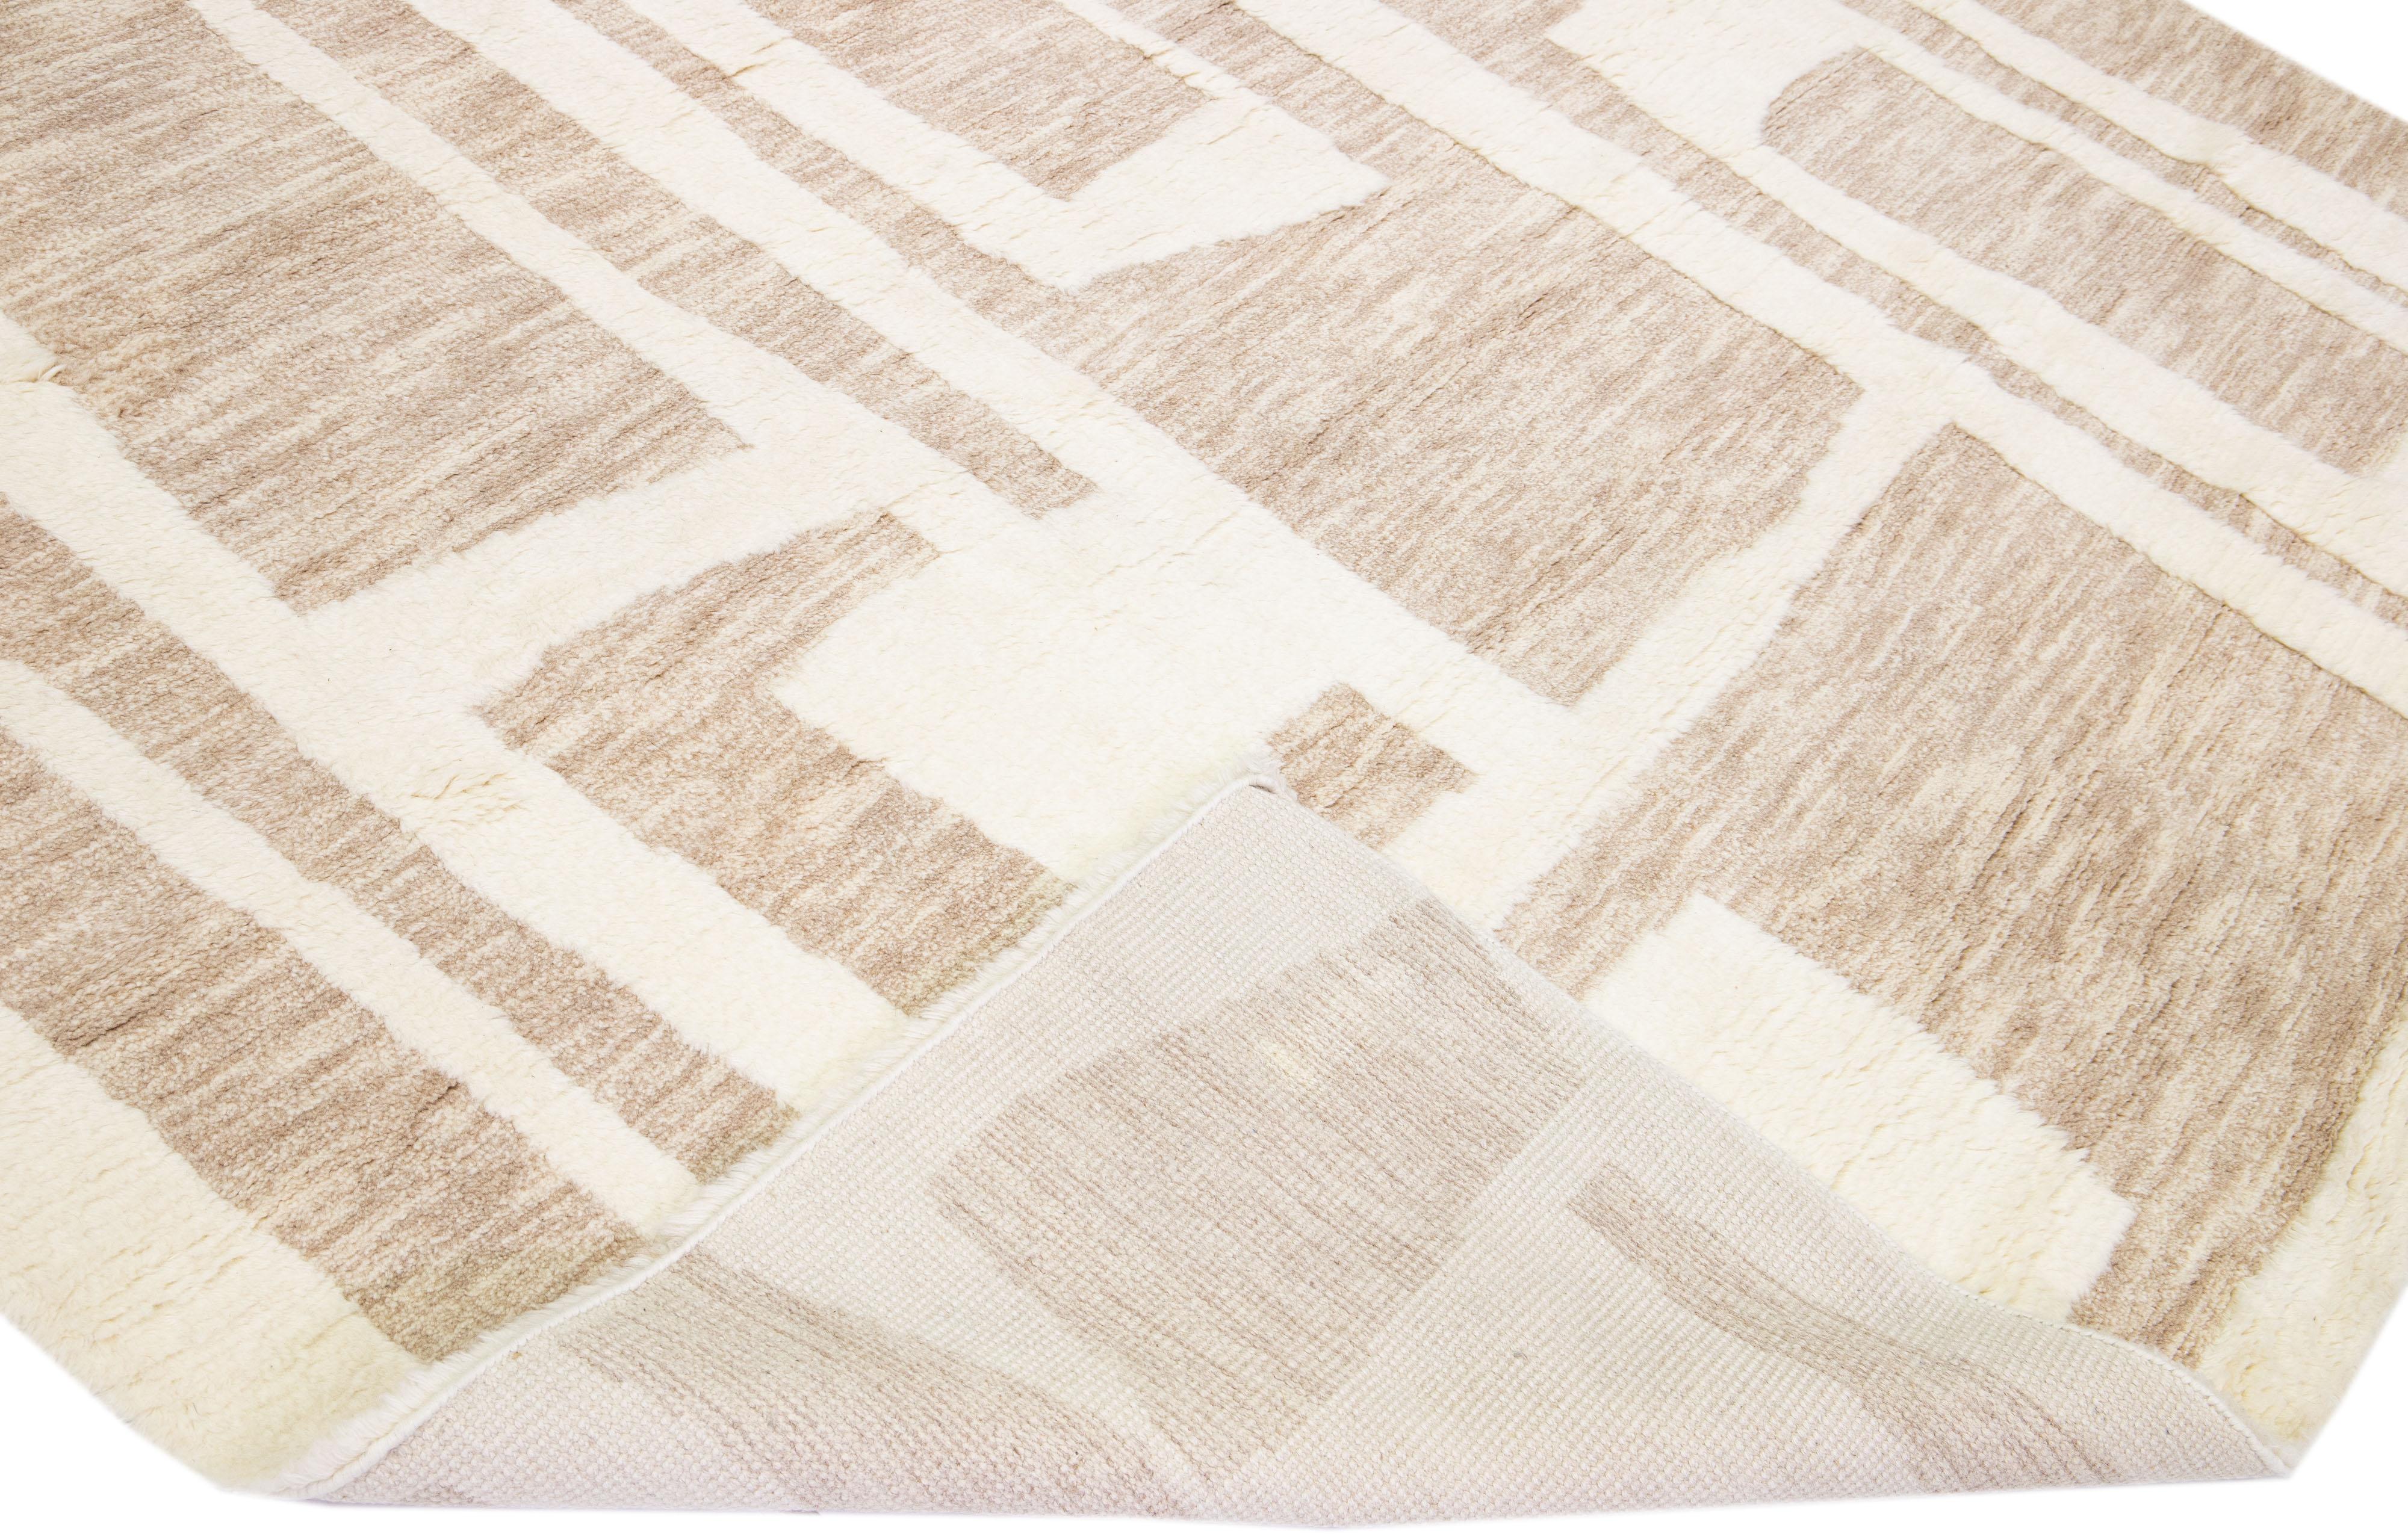 Beautiful modern Moroccan style hand-knotted wool rug with a light brown color field and ivory accents in a gorgeous geometric abstract high pile design.

This rug measures: 10'1